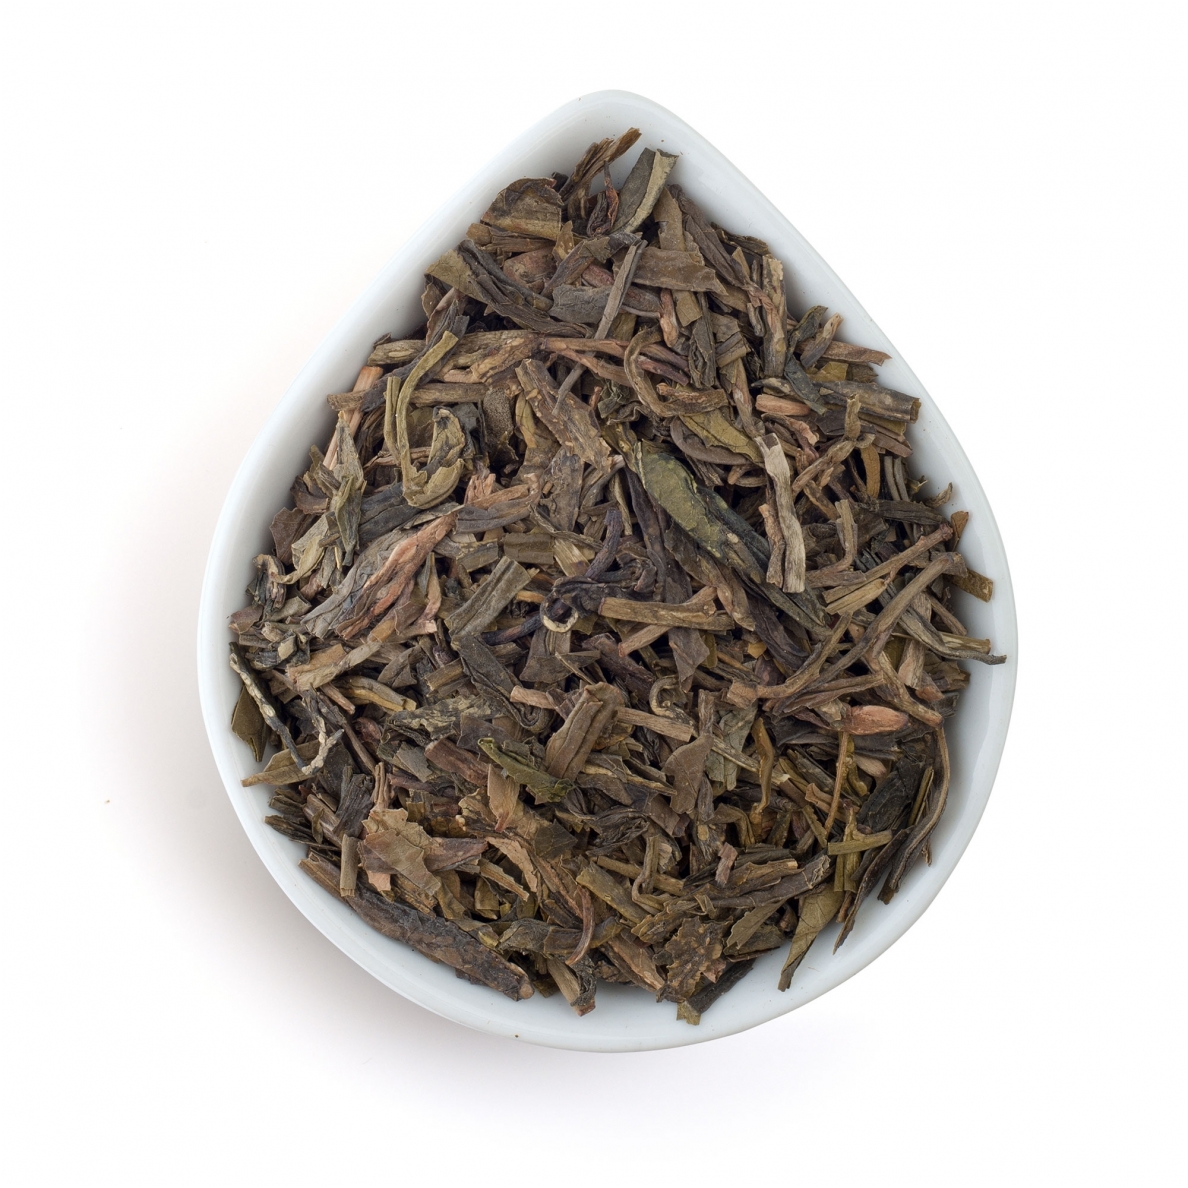 CHINESE LUNG CHING 1ST GRADE GREEN TEA